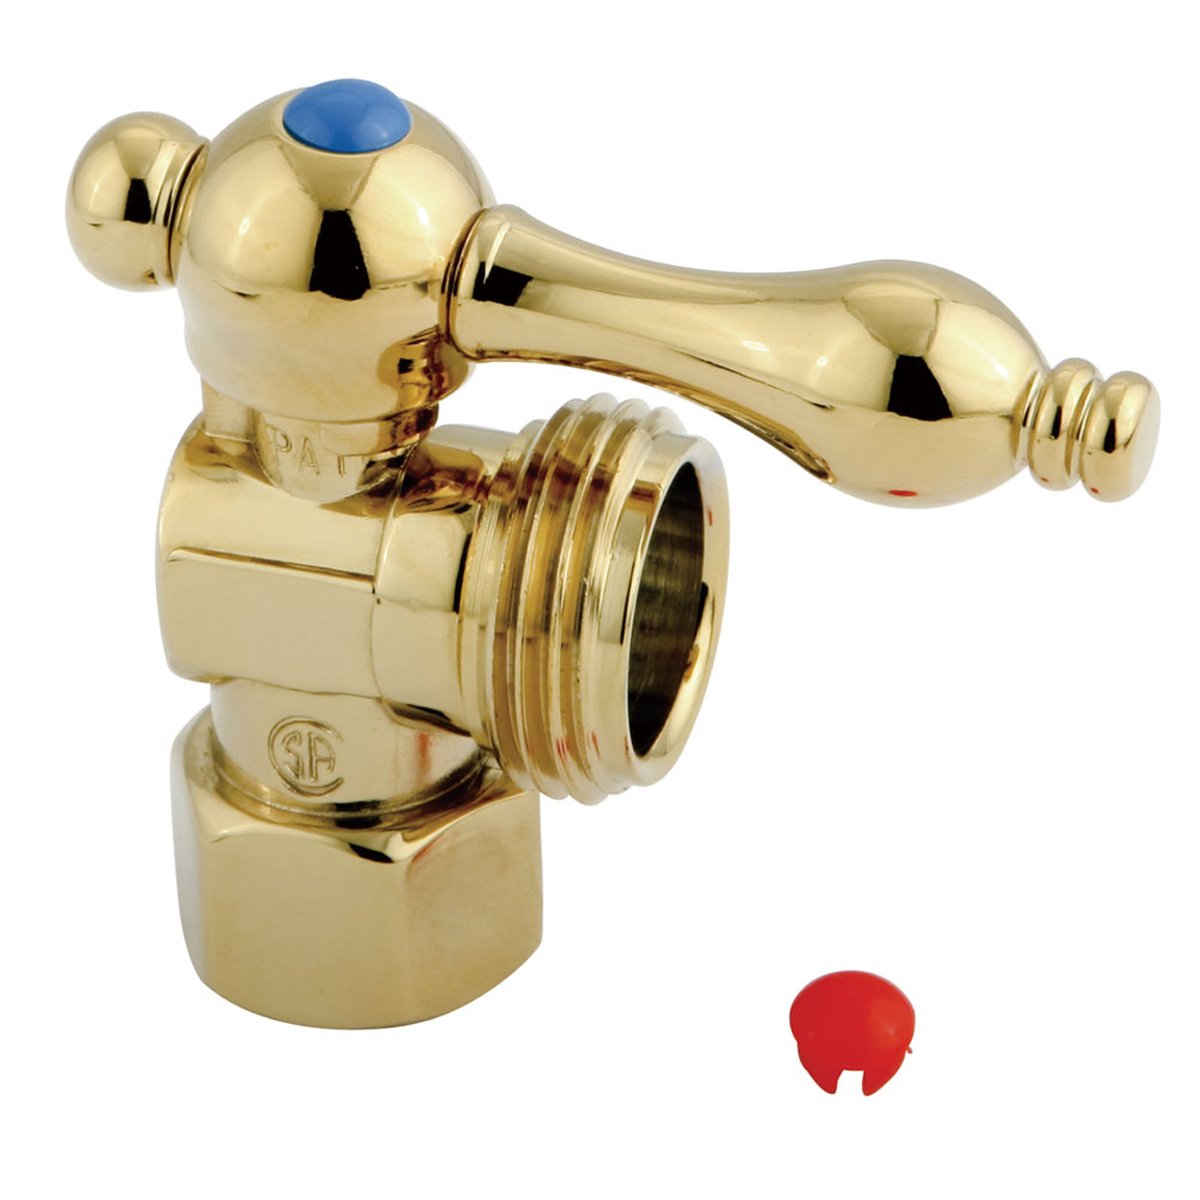 Kingston Brass Vintage Angle Stop with 1/2" IPS x 3/4" Hose Thread-Bathroom Accessories-Free Shipping-Directsinks.